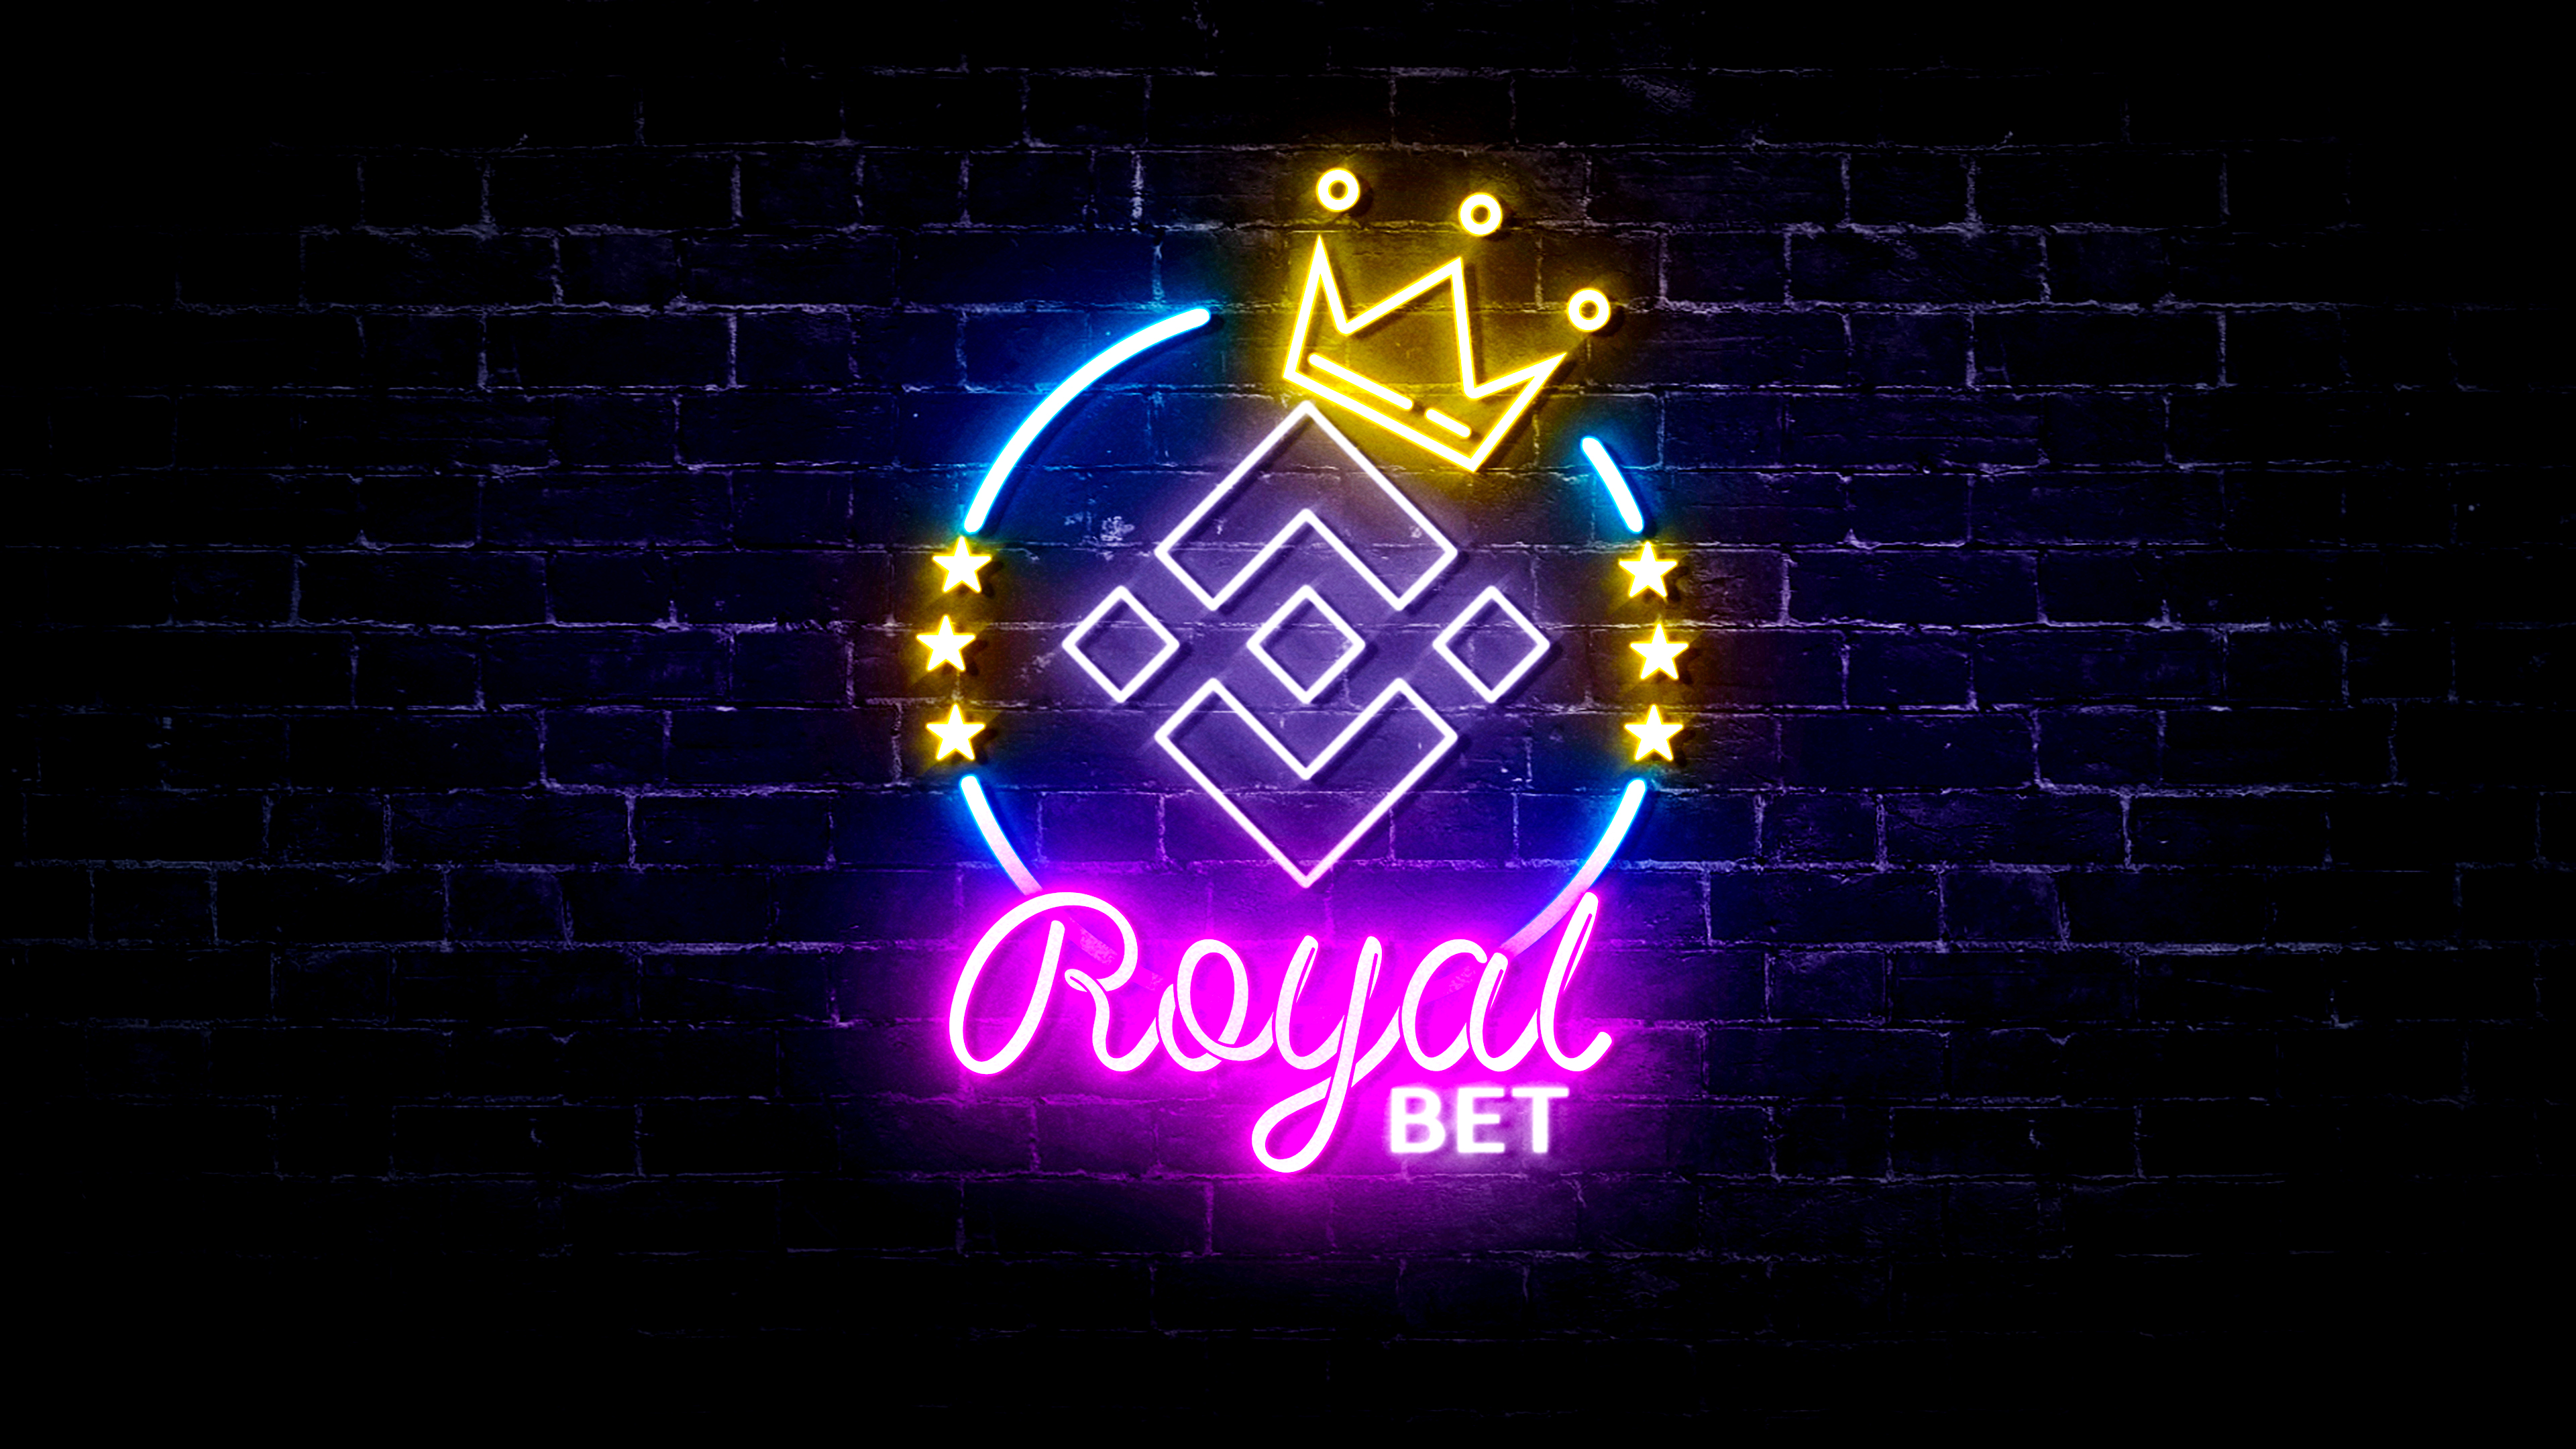 Royal Bet is the new trending token in cryptocurrency, just like Shiba Inu and Doge this may be the next crypto gem that explodes beyond expectation